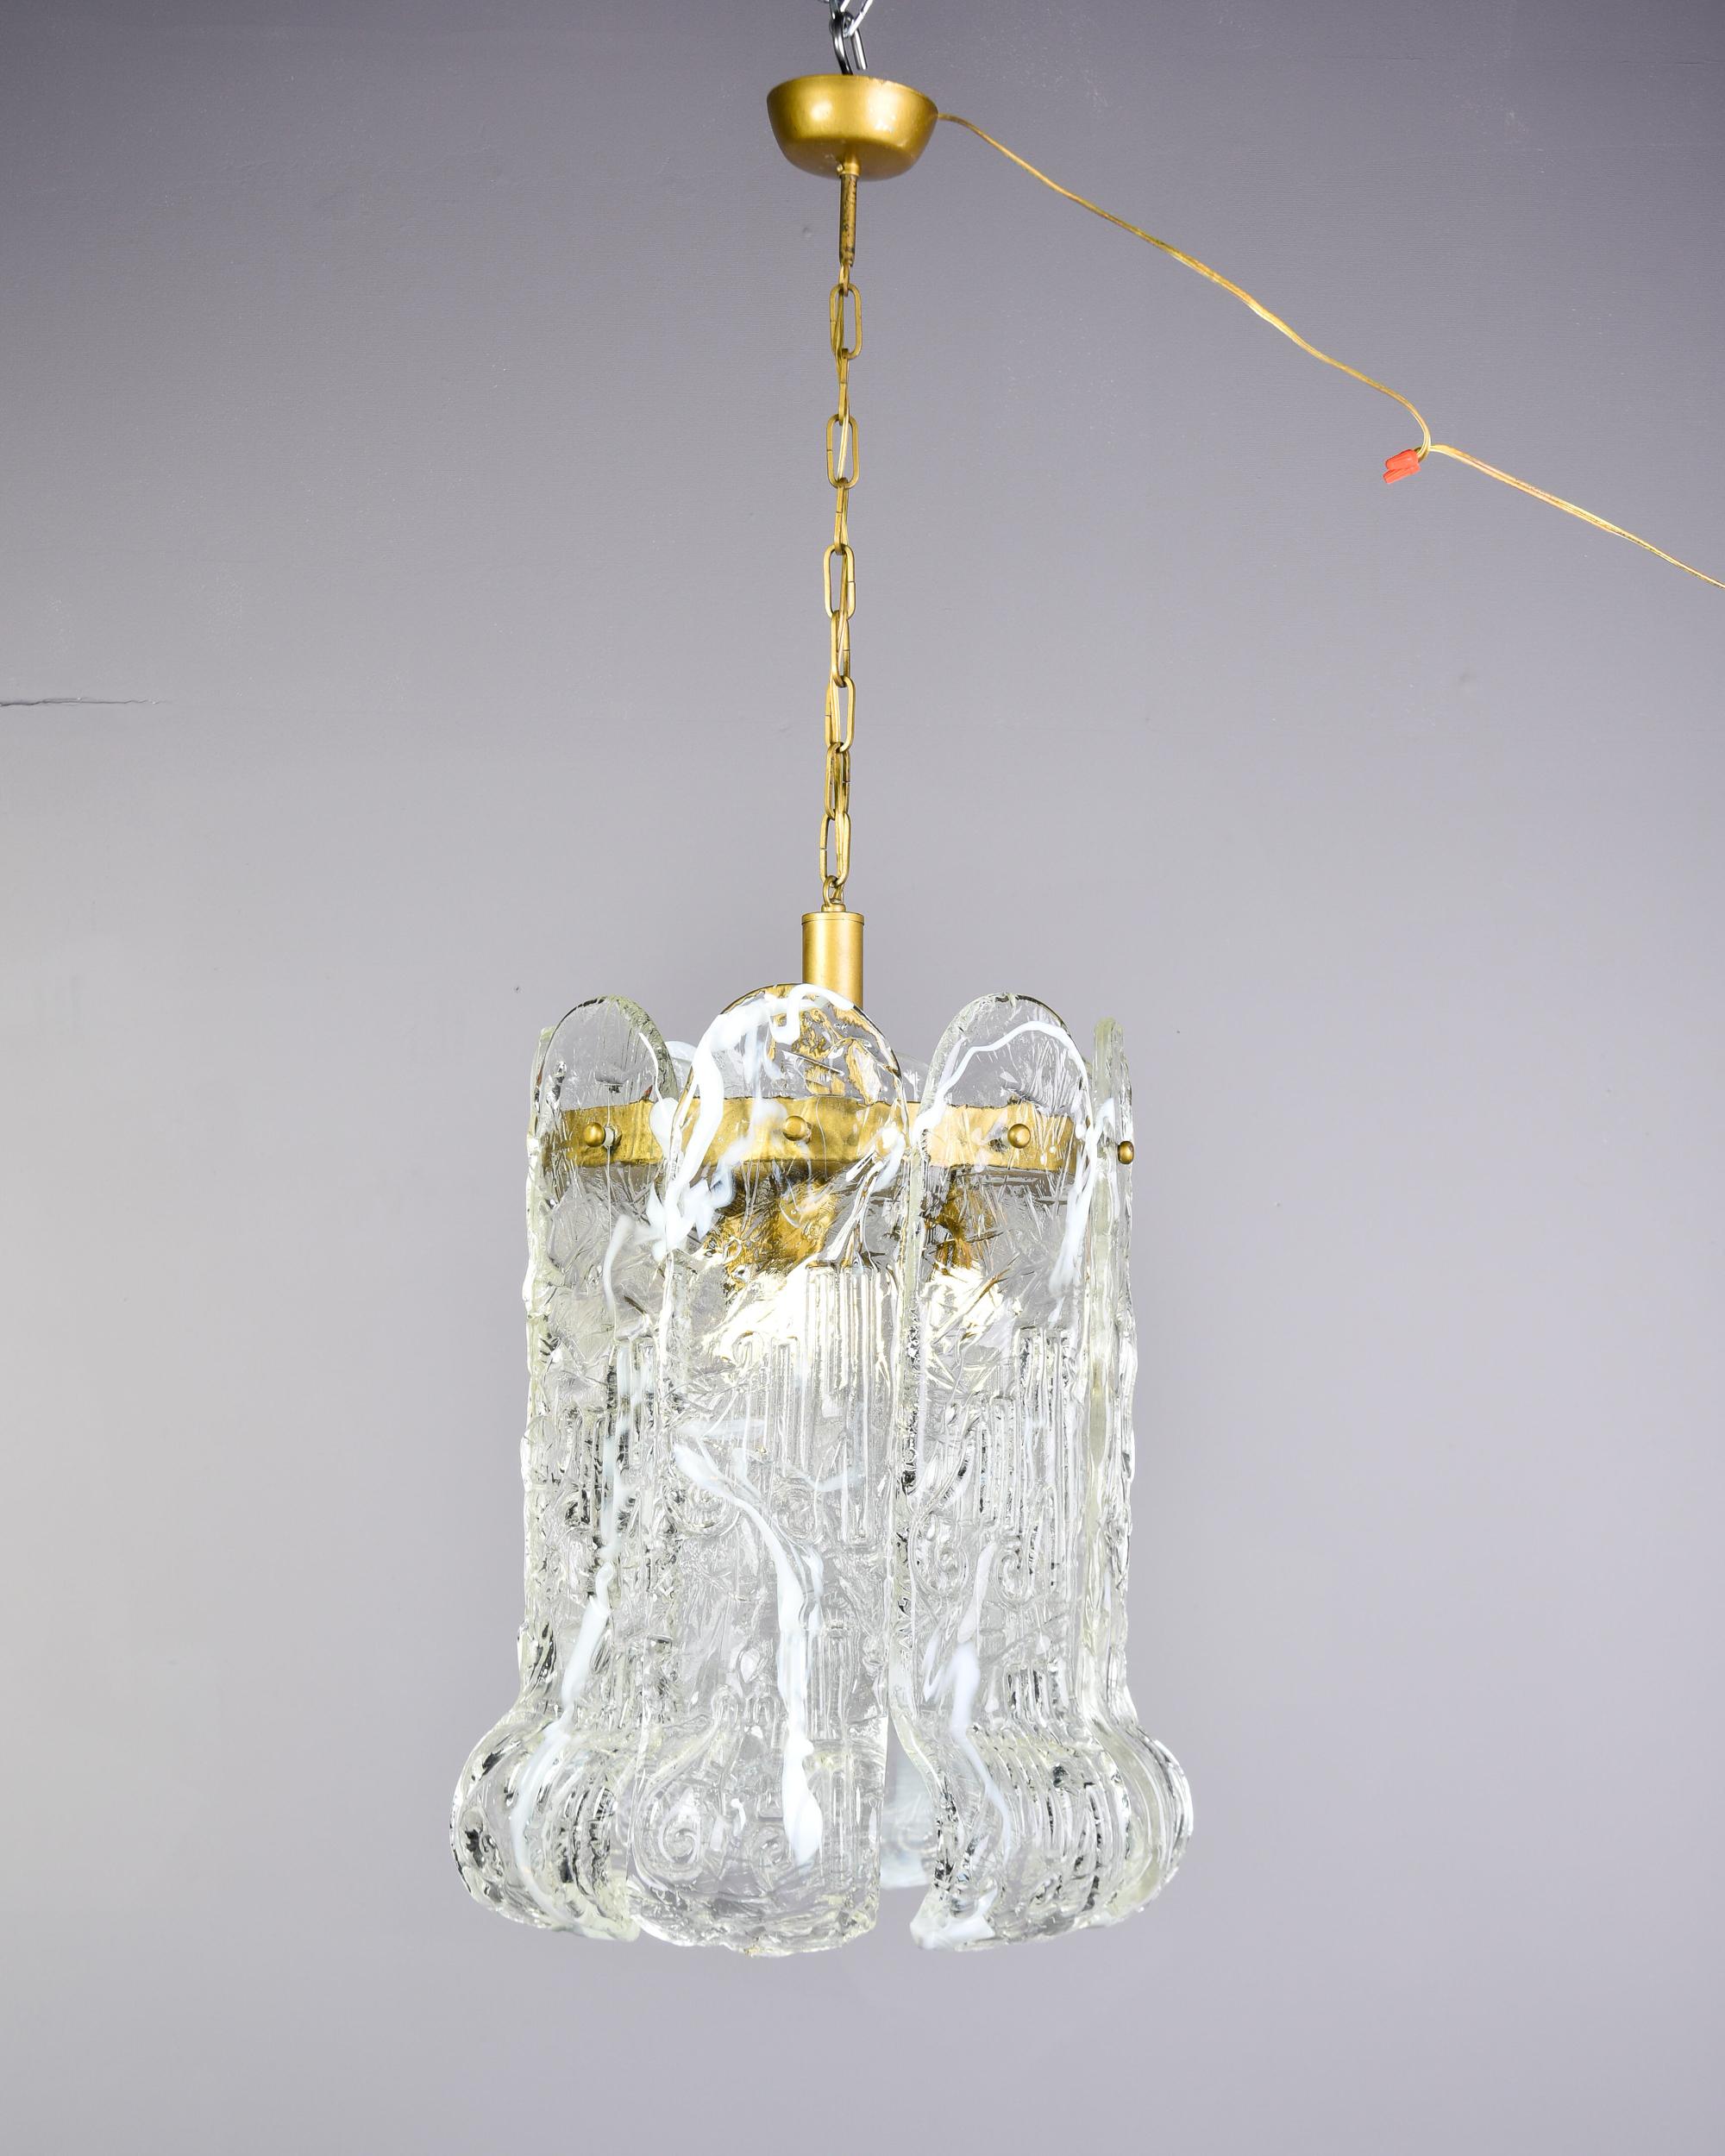 Found in Italy, this hanging Murano glass pendant fixture attributed to Mazzega dates from the early 1970s. This fixture has a brass frame and eight large, clear mouth blown glass pendants that curve under at the ends. The pendants are suspended on